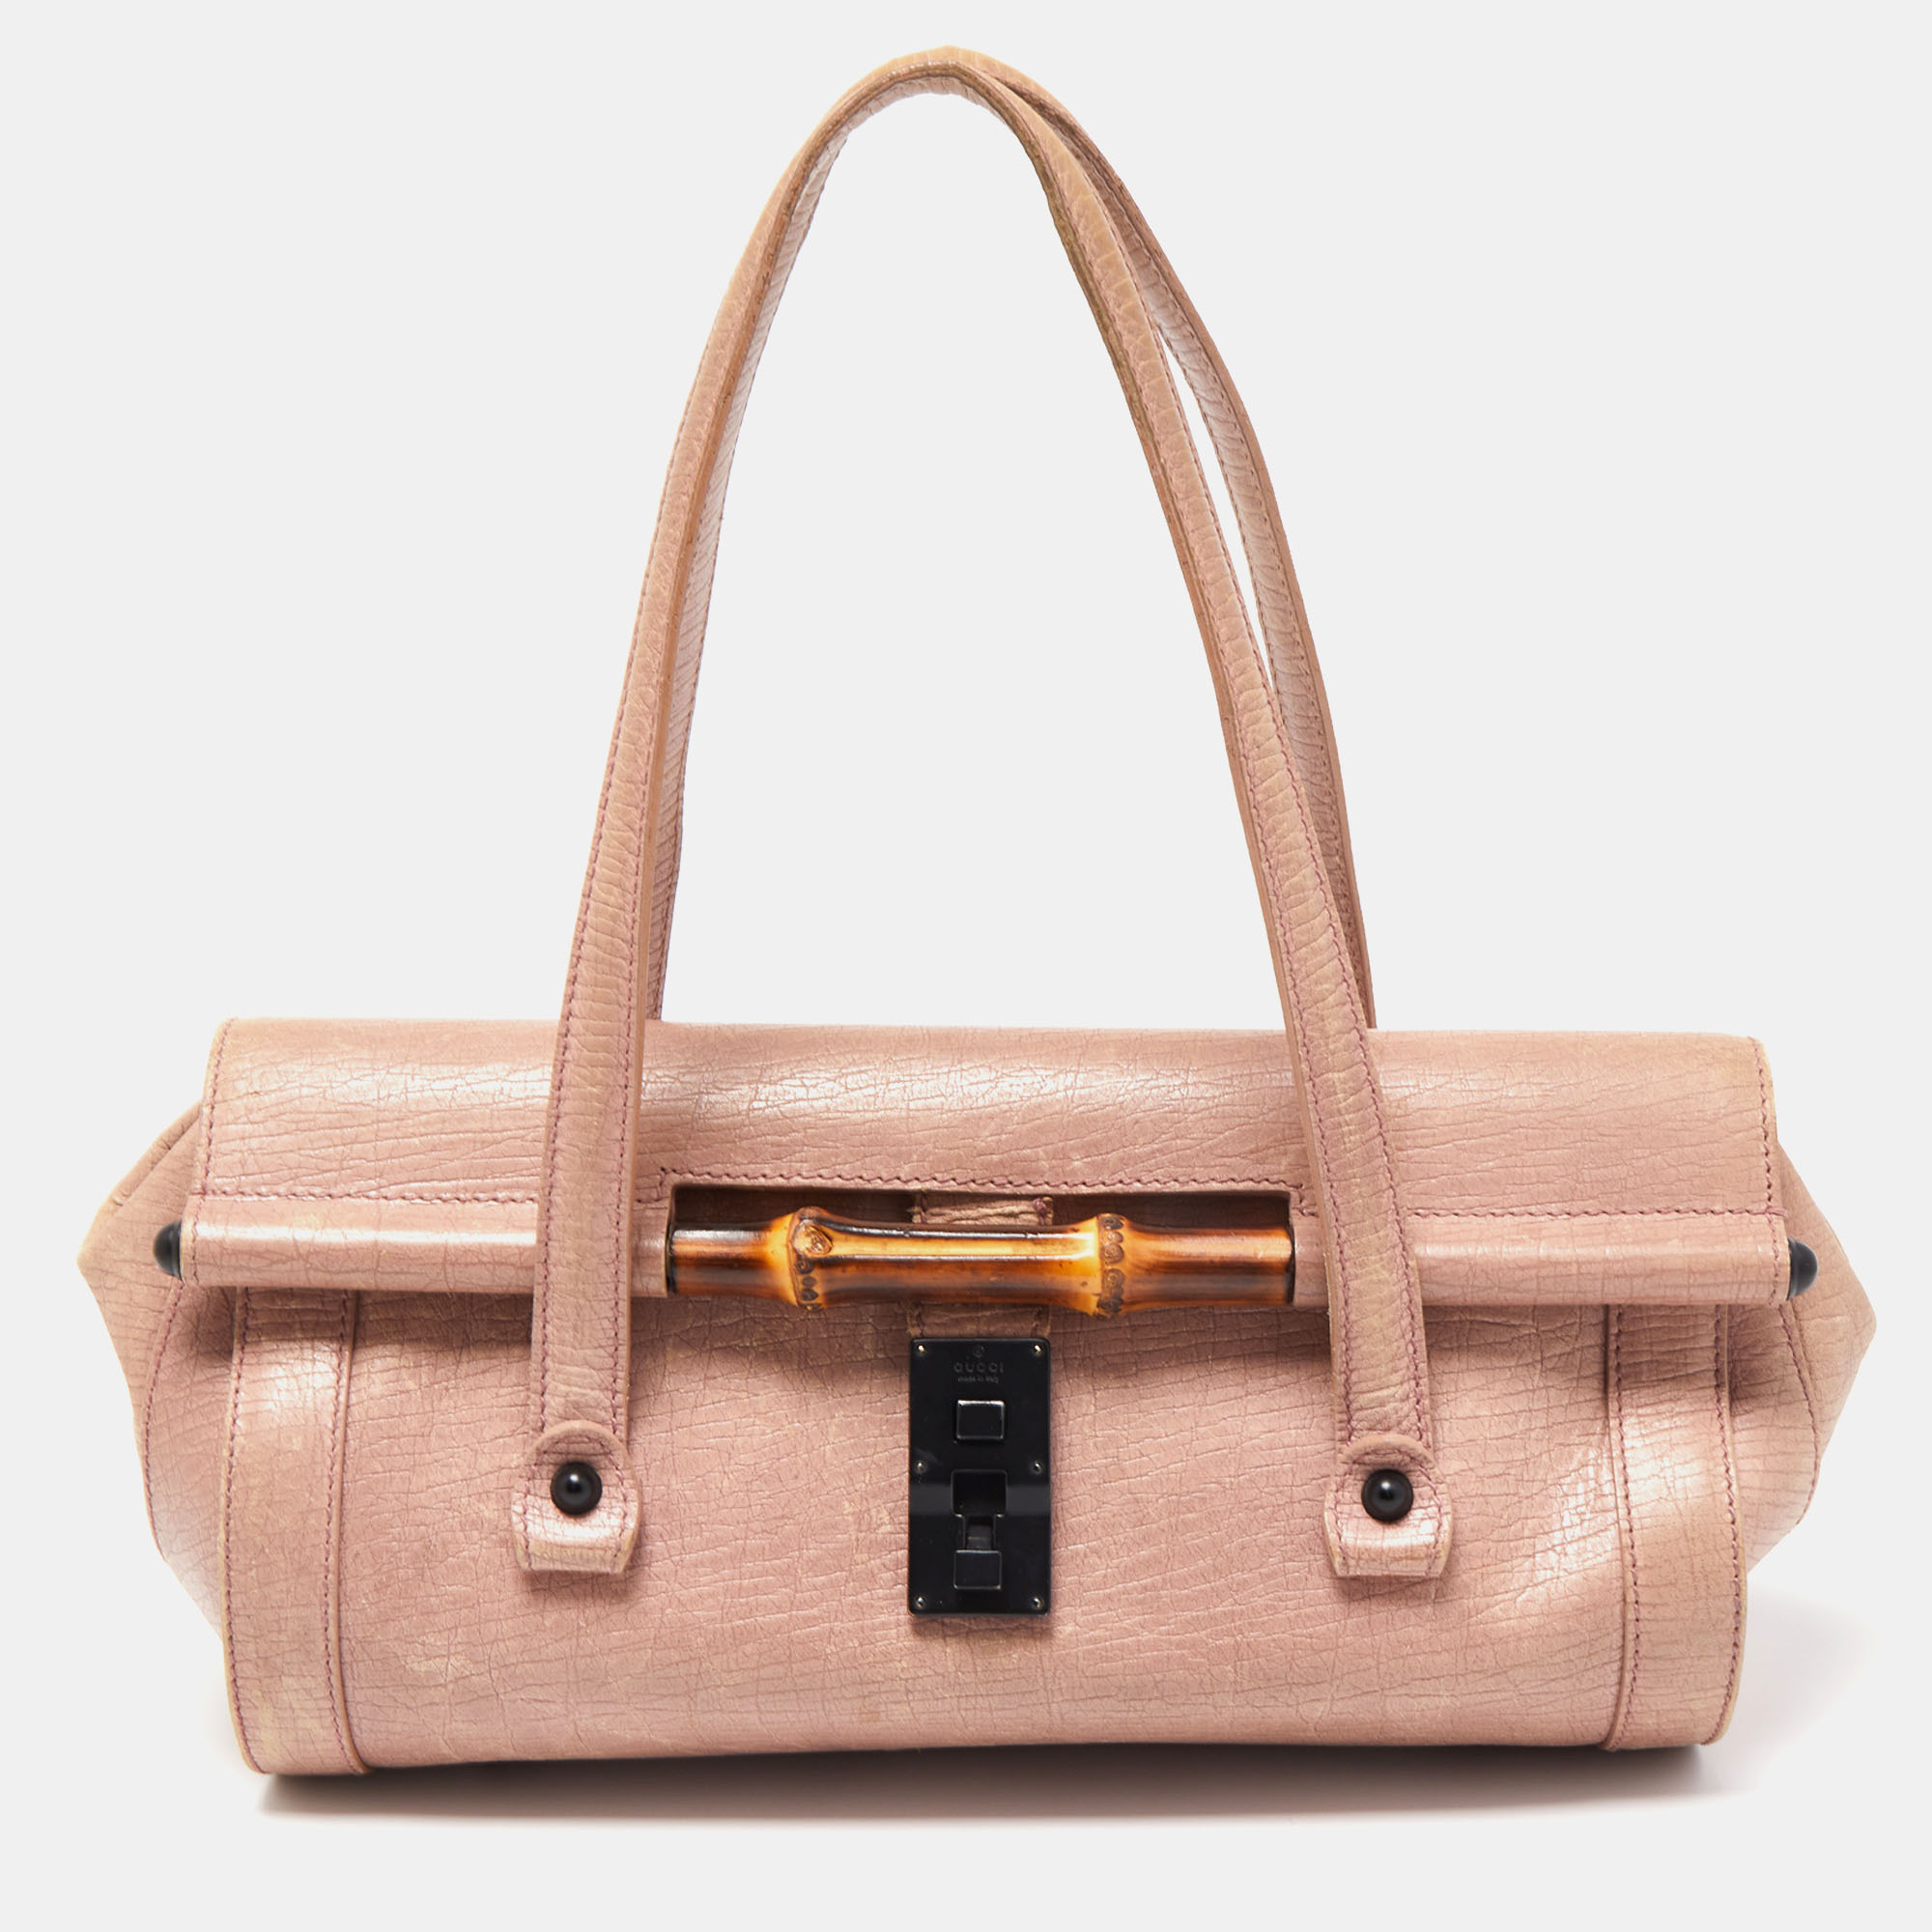 Stylish and easy to carry this designer satchel will be a fine choice for work or after. Lined well this pre loved bag for women can easily fit all your essentials. It can be held in your arm or hand.